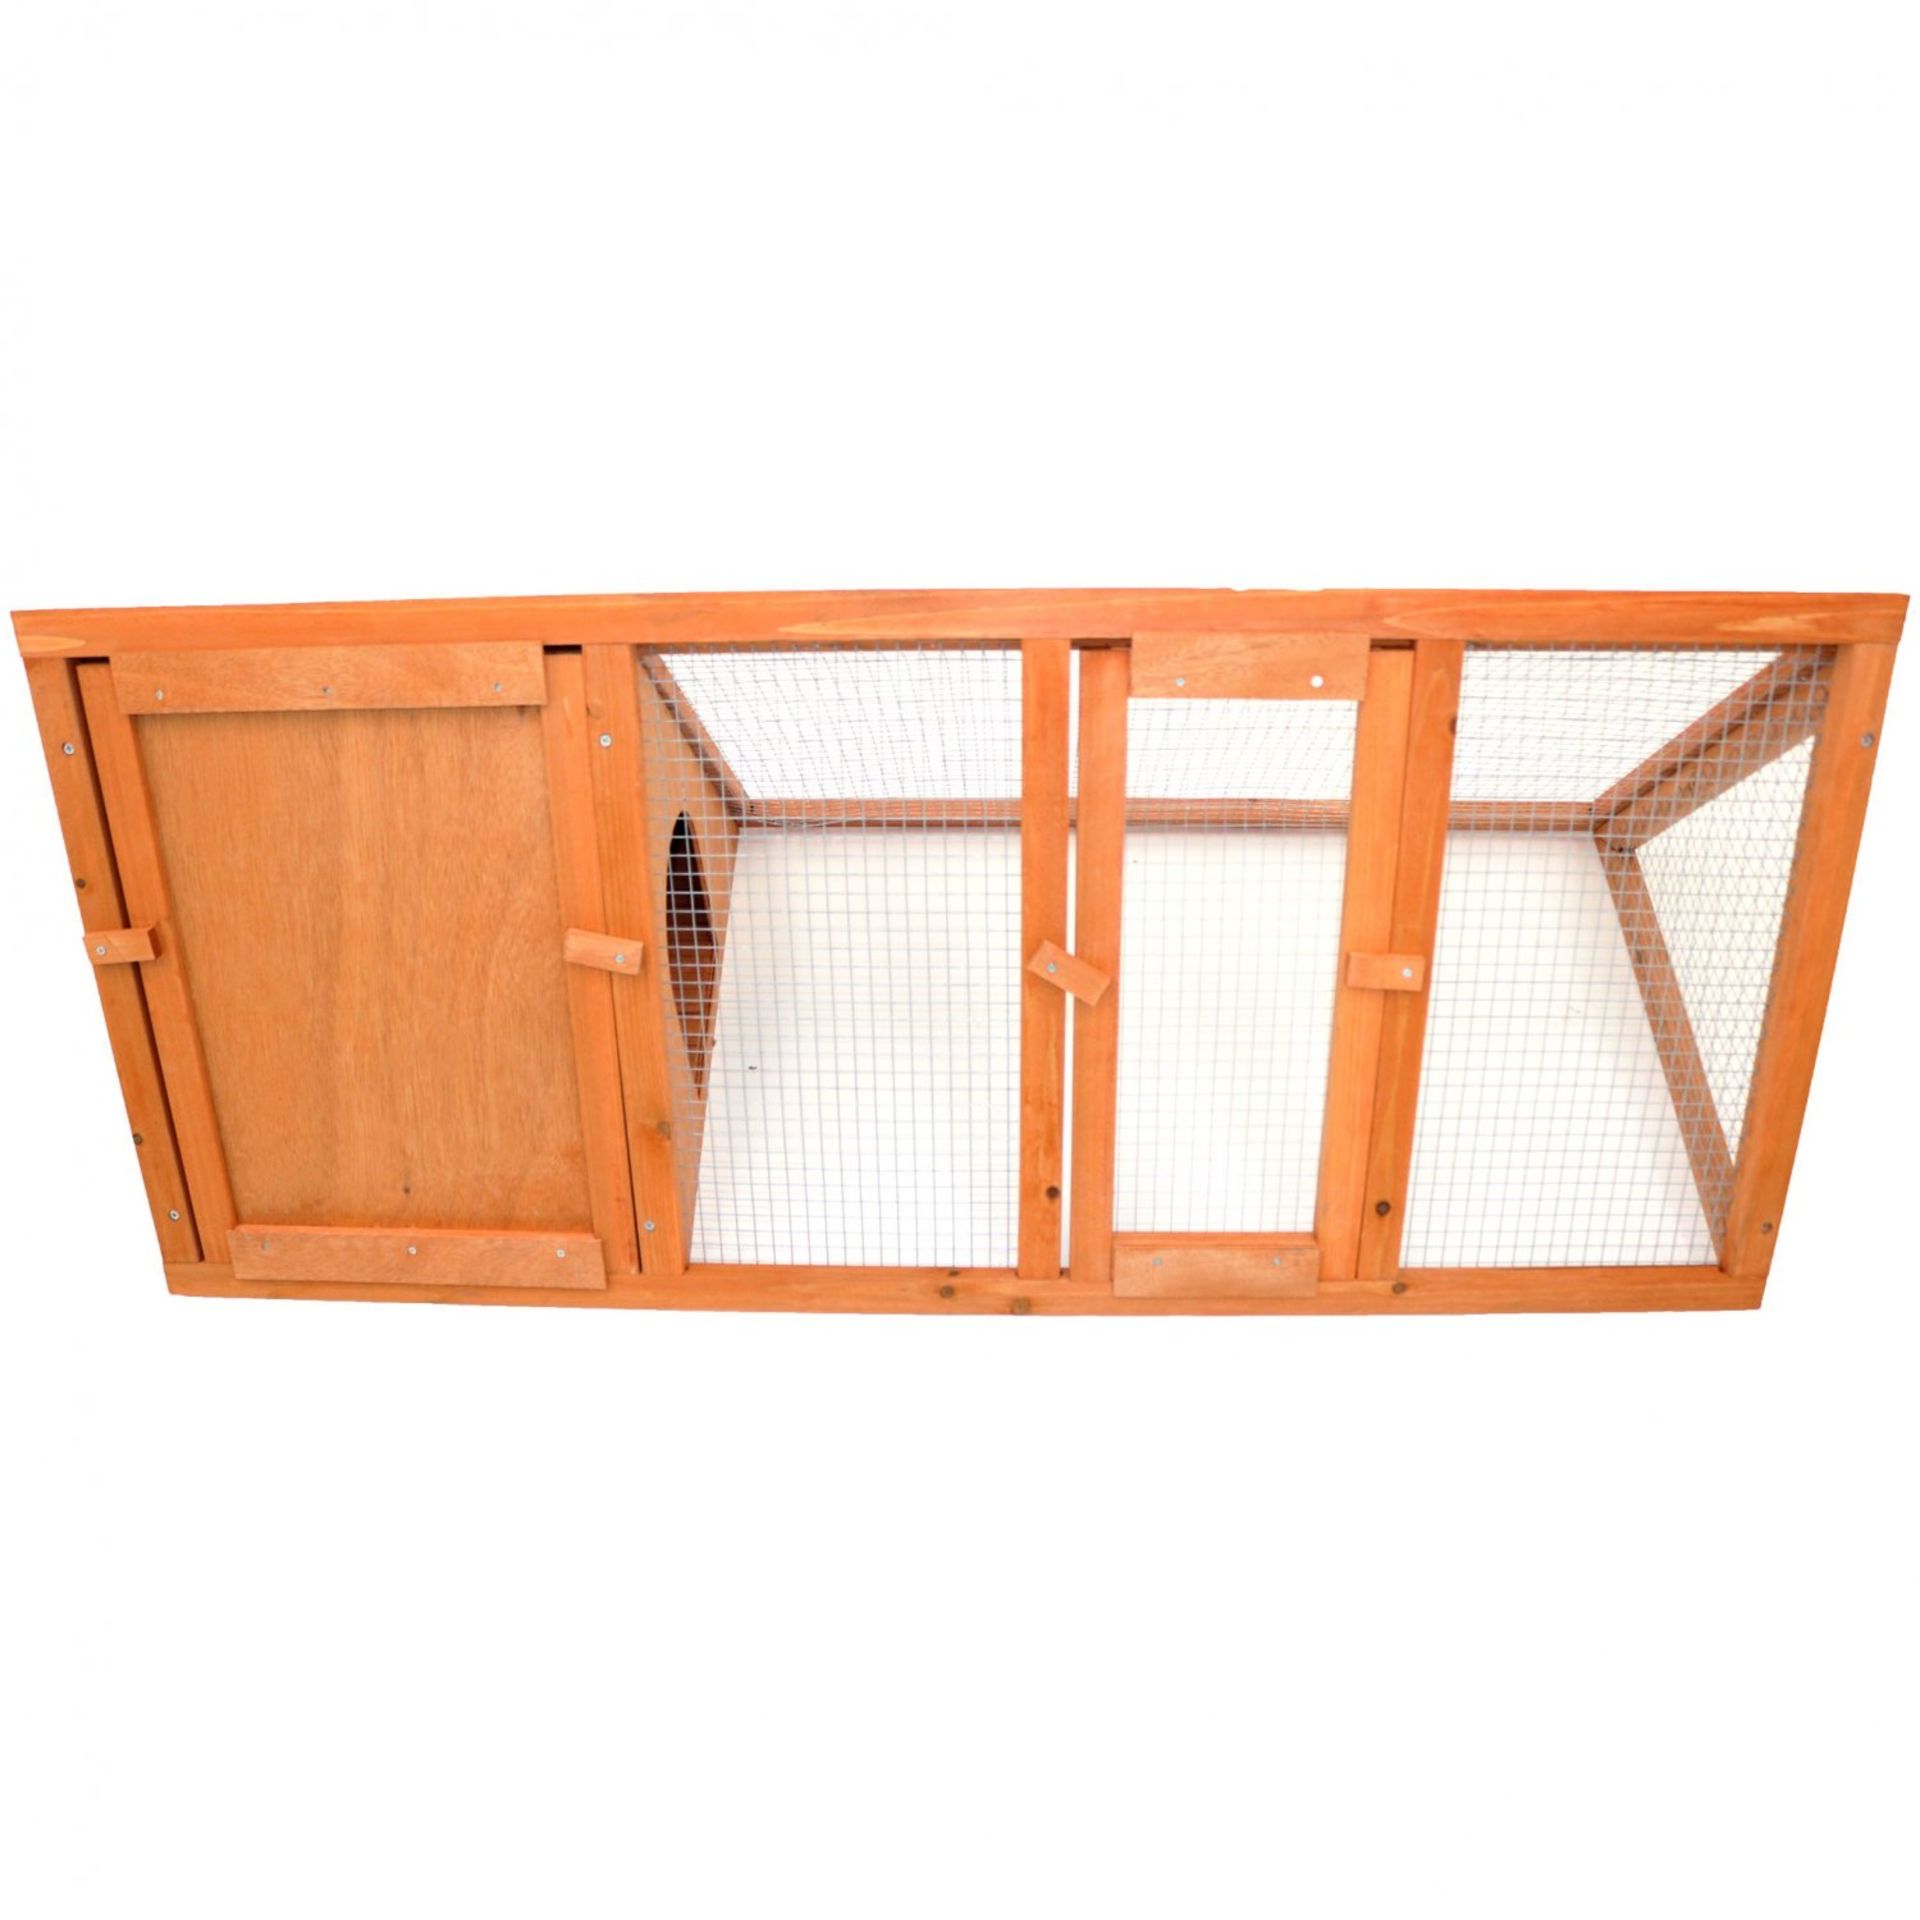 (KK142) Wooden Outdoor Triangle Rabbit Guinea Pig Pet Hutch Run Cage The triangle hutch is... - Image 2 of 2